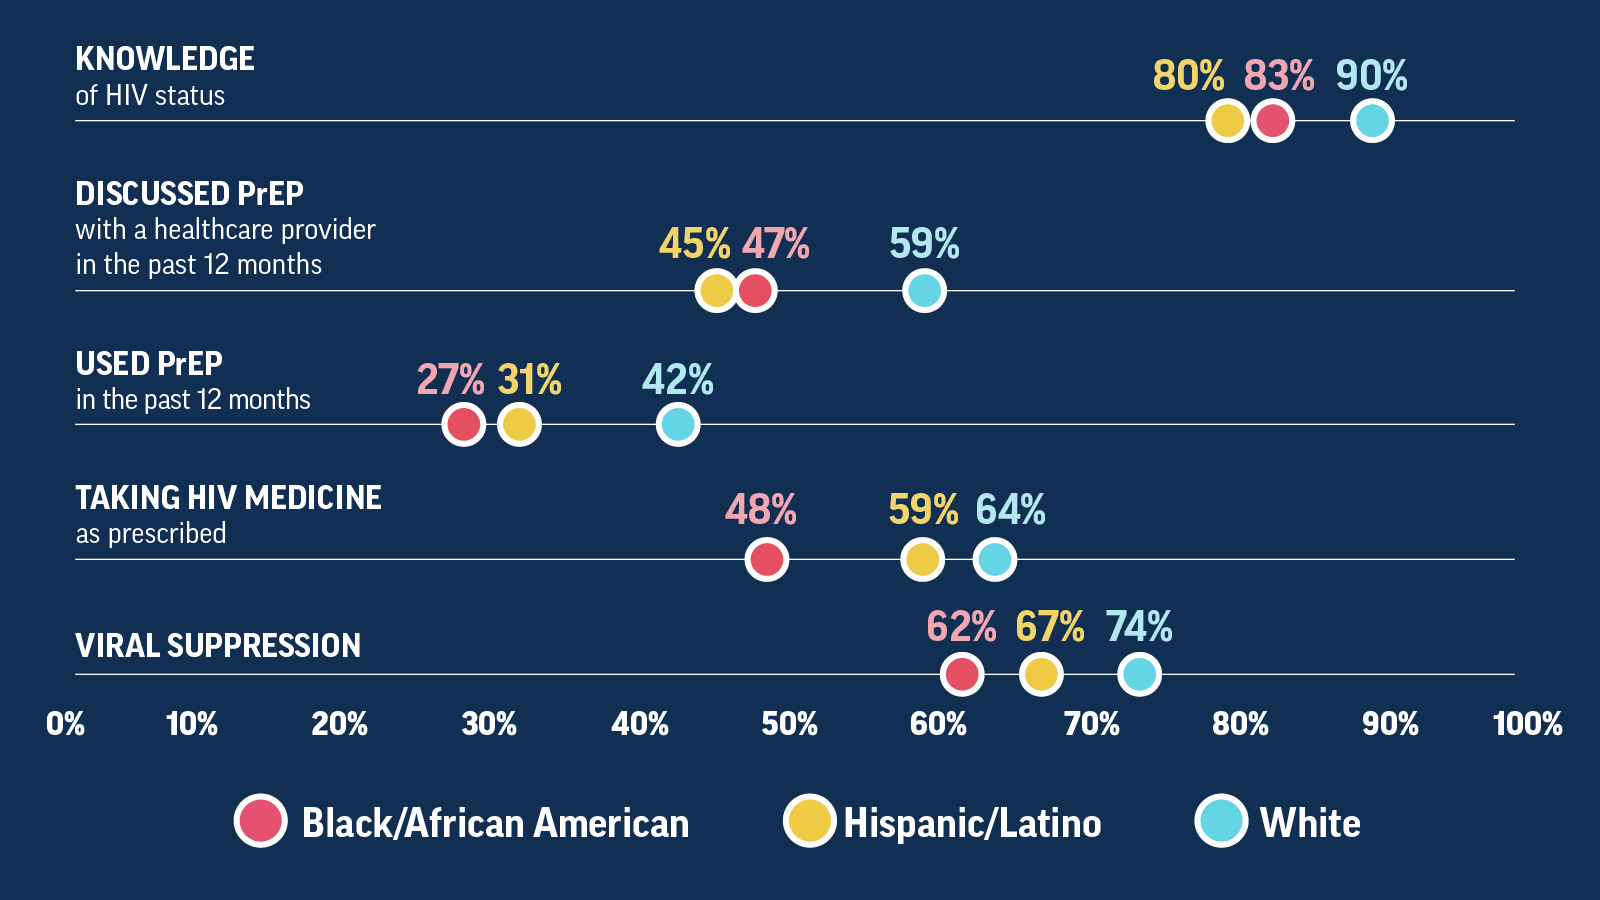 Table showing inequities by race/ethnicity among gay/bisexual men in HIV prevention and treatment outcomes.